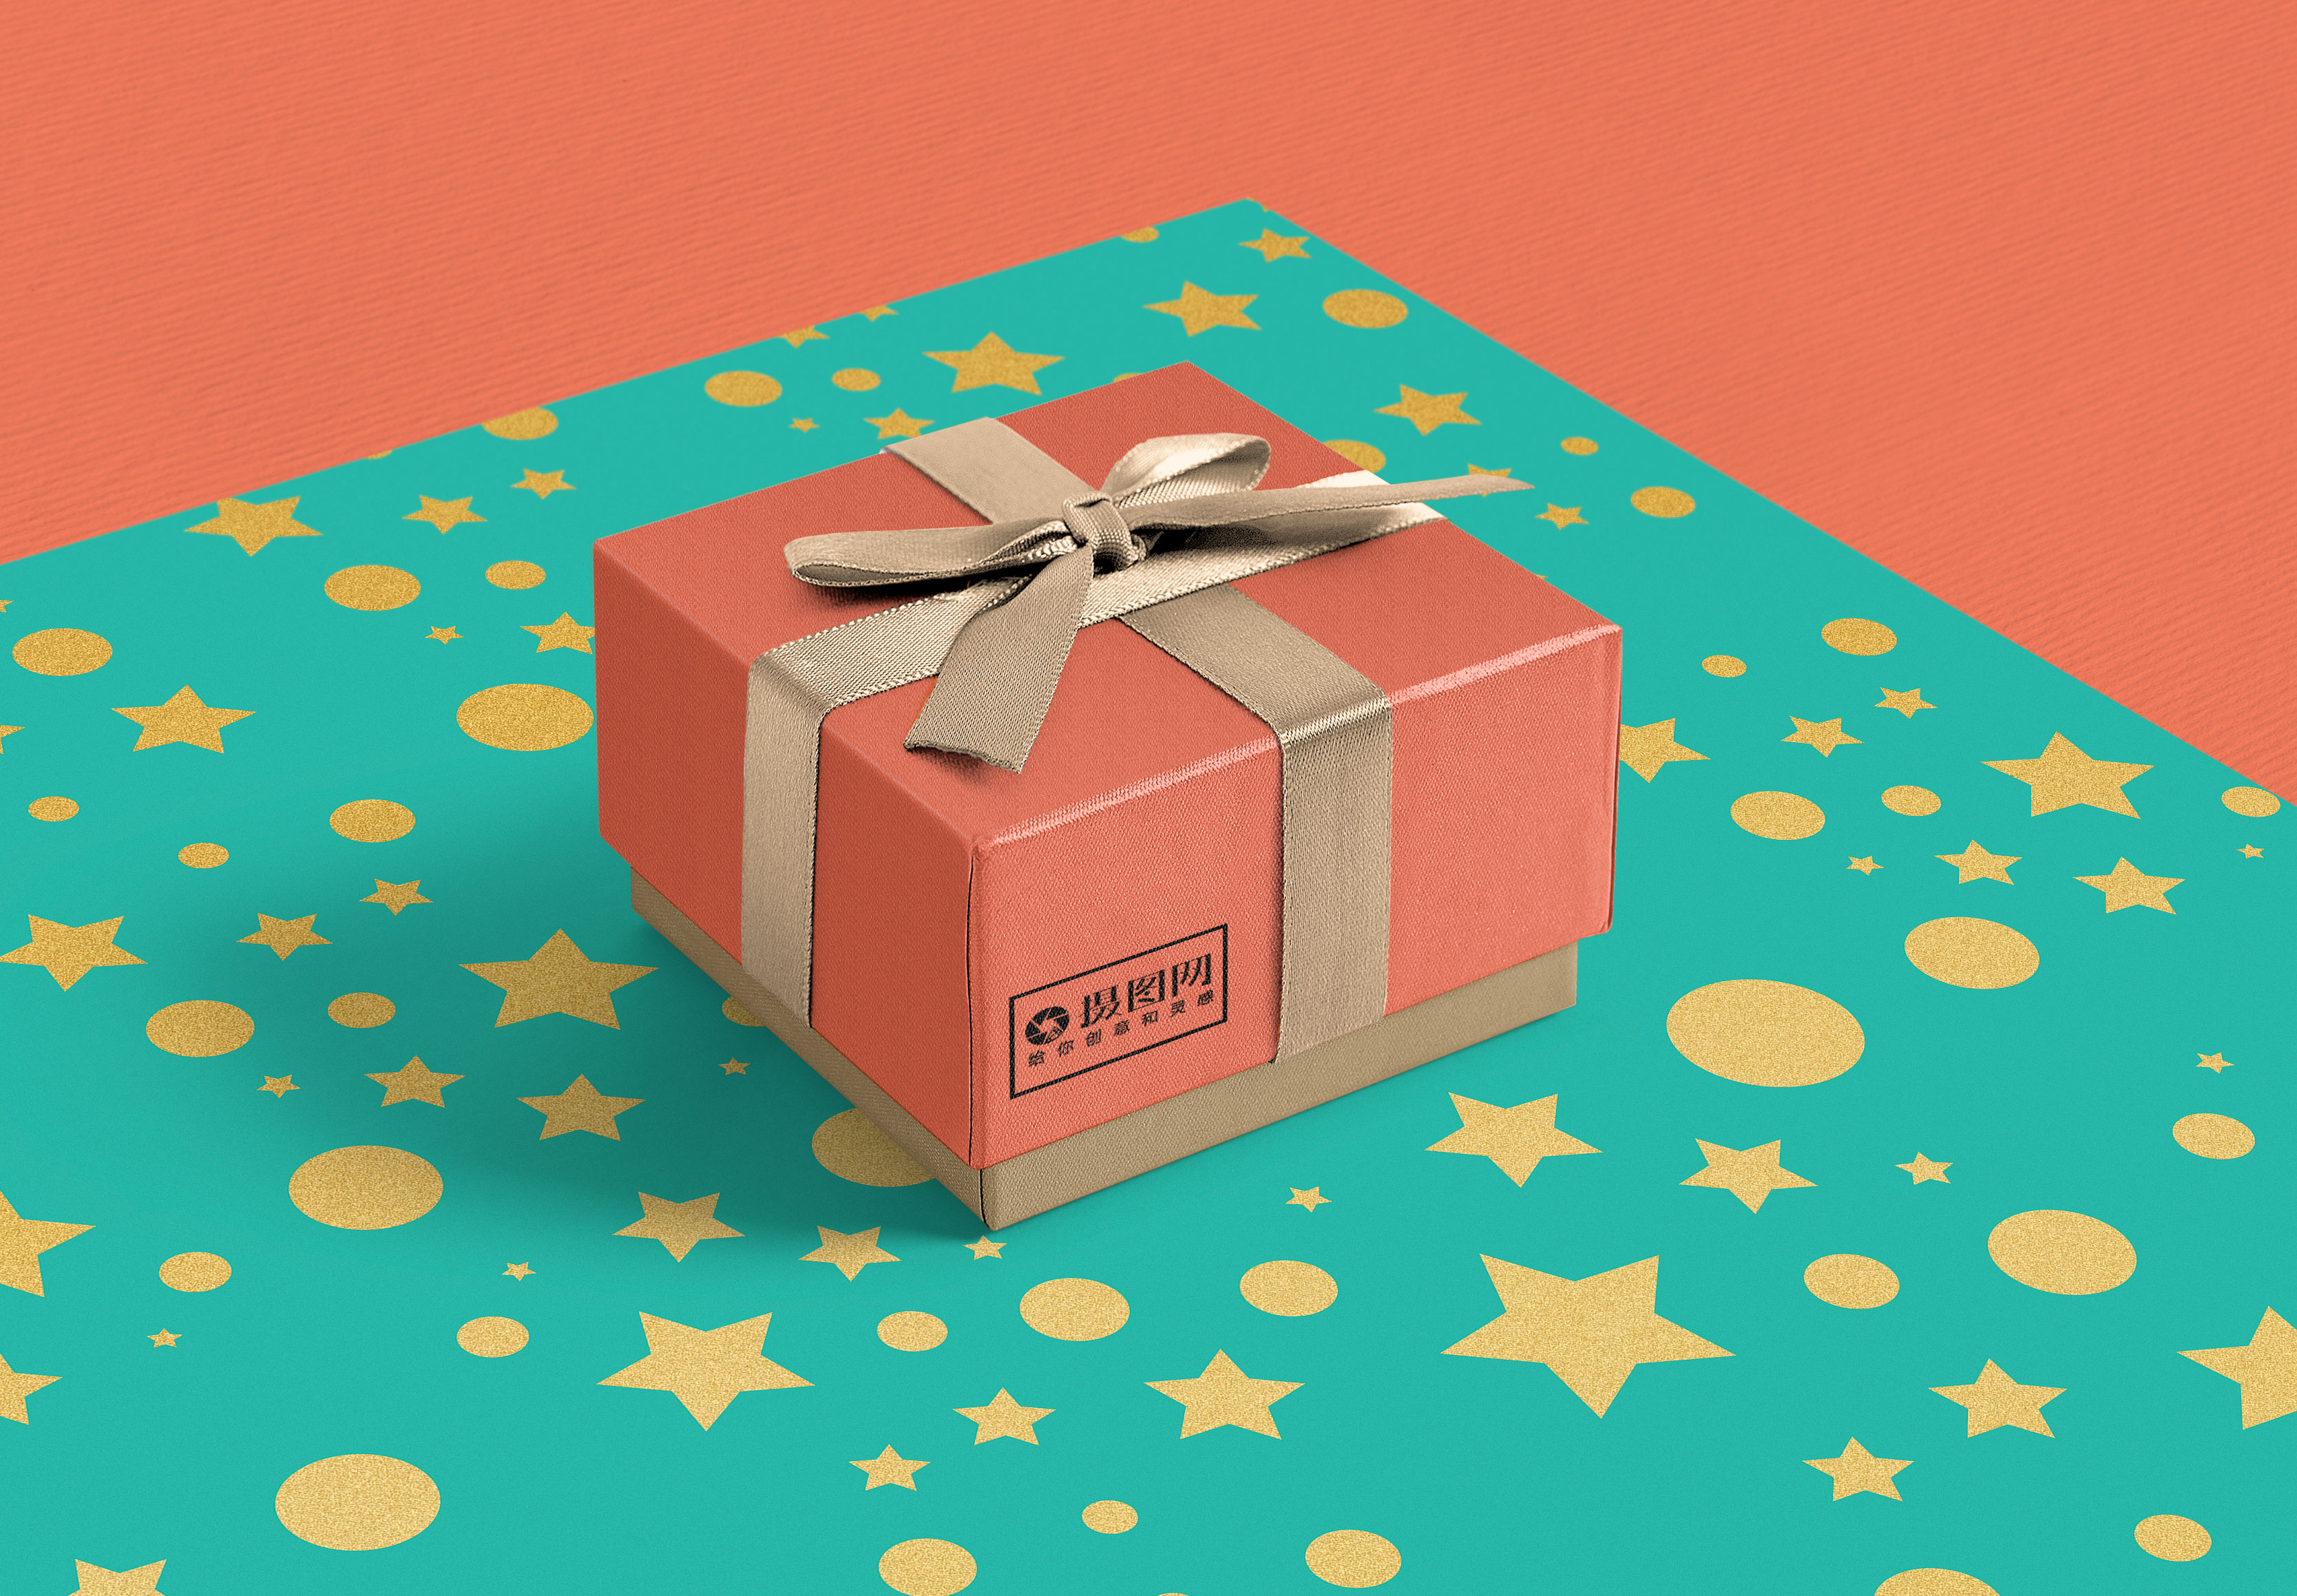 Everything You Need to Know about Custom Gift Boxes with Logo